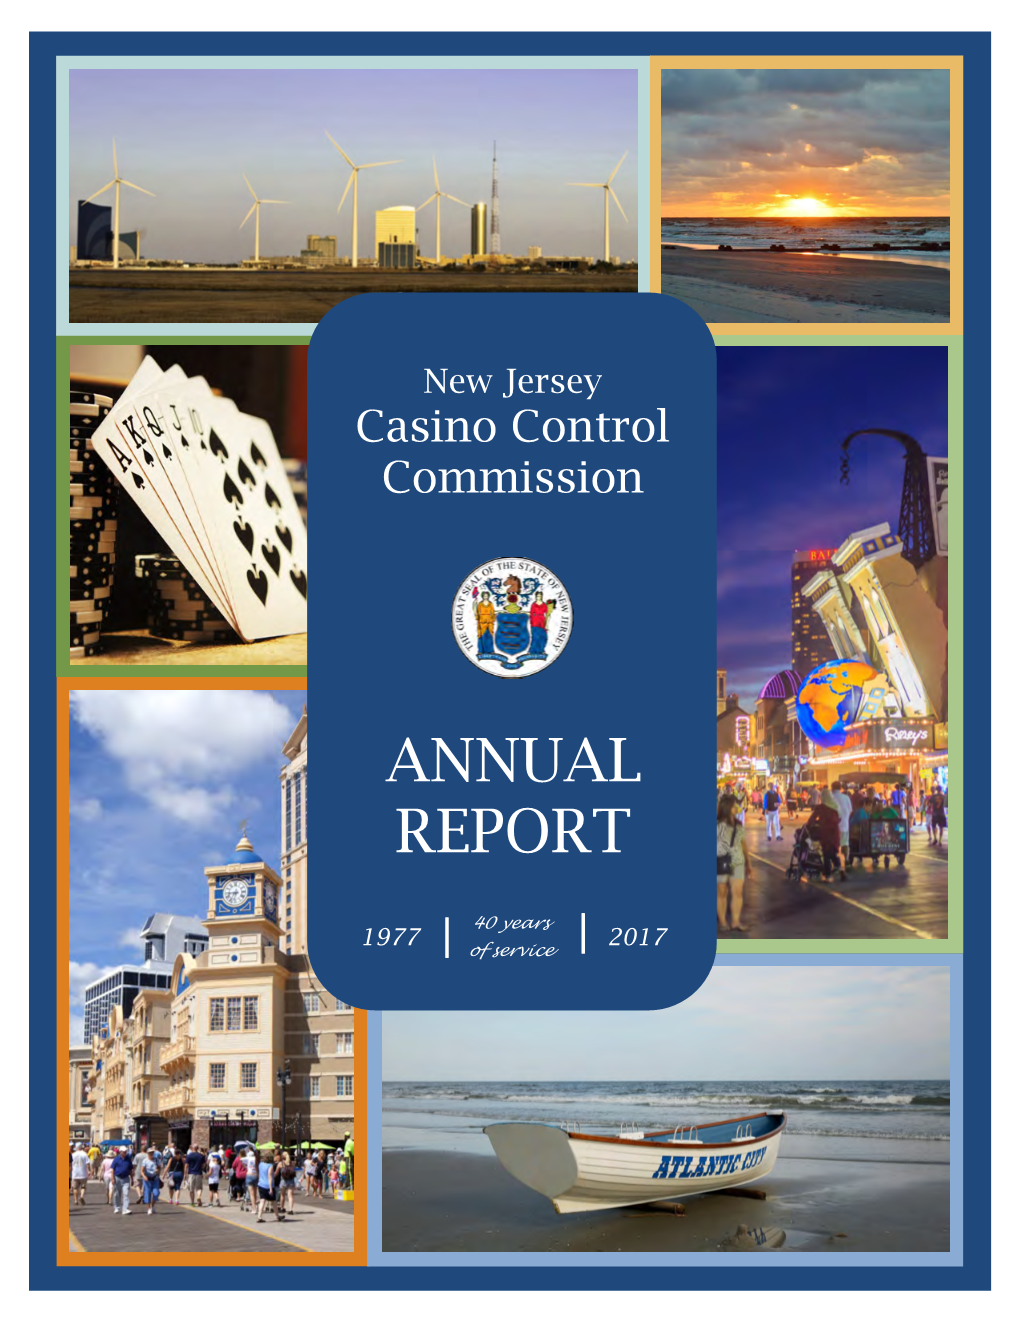 2017 Annual Report of the New Jersey Casino Control Commission